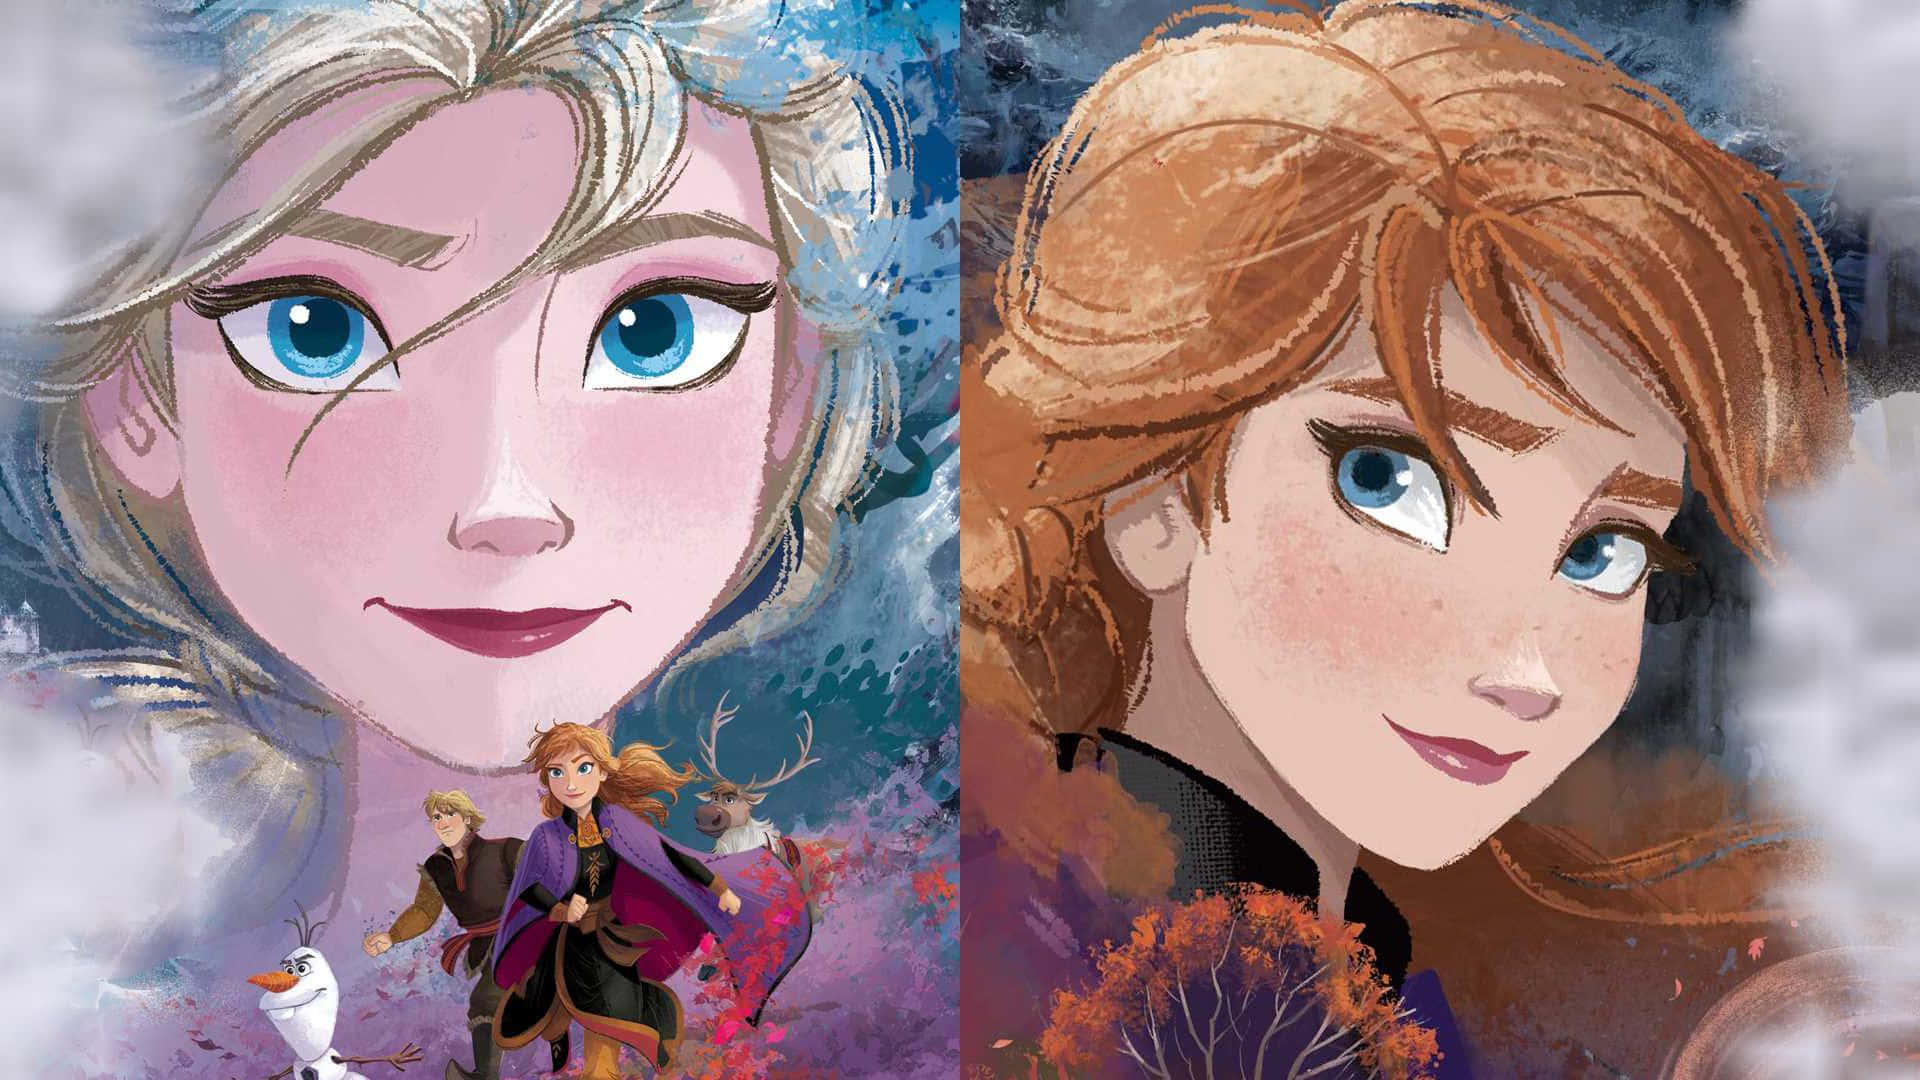 New Adventures for Anna and Elsa in 'Frozen 2'